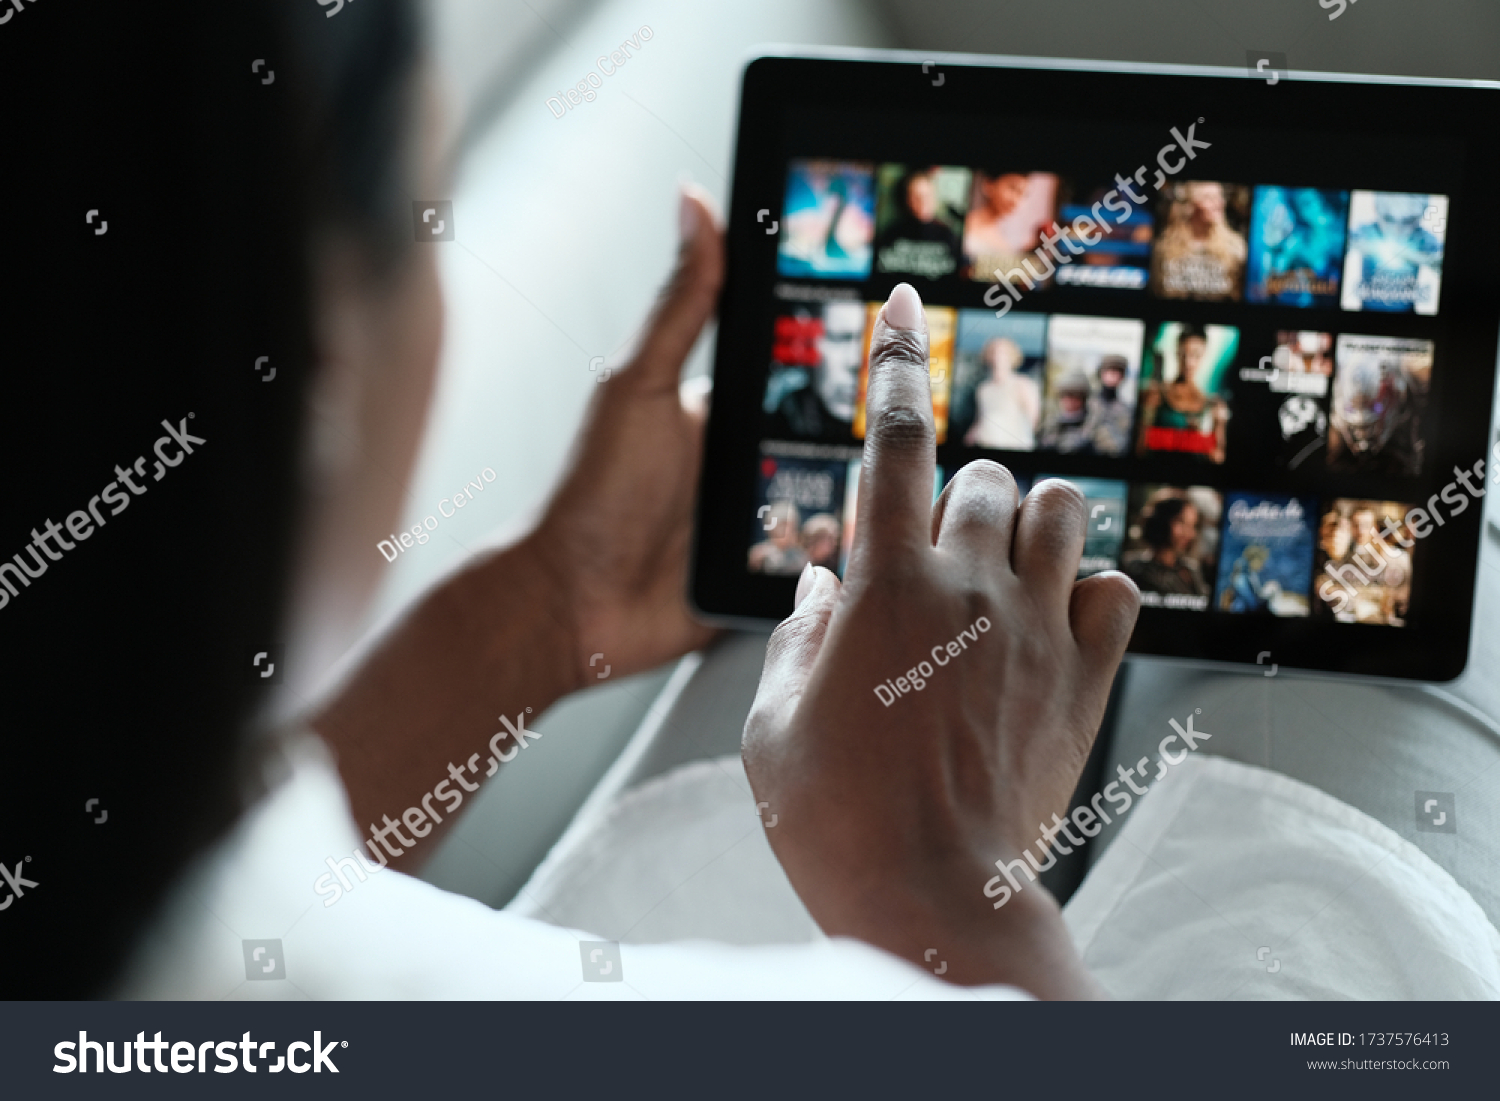 African American Woman Lying Down On Sofa At Home, Choosing Movie On Internet Streaming Service. Over The Shoulders. #1737576413